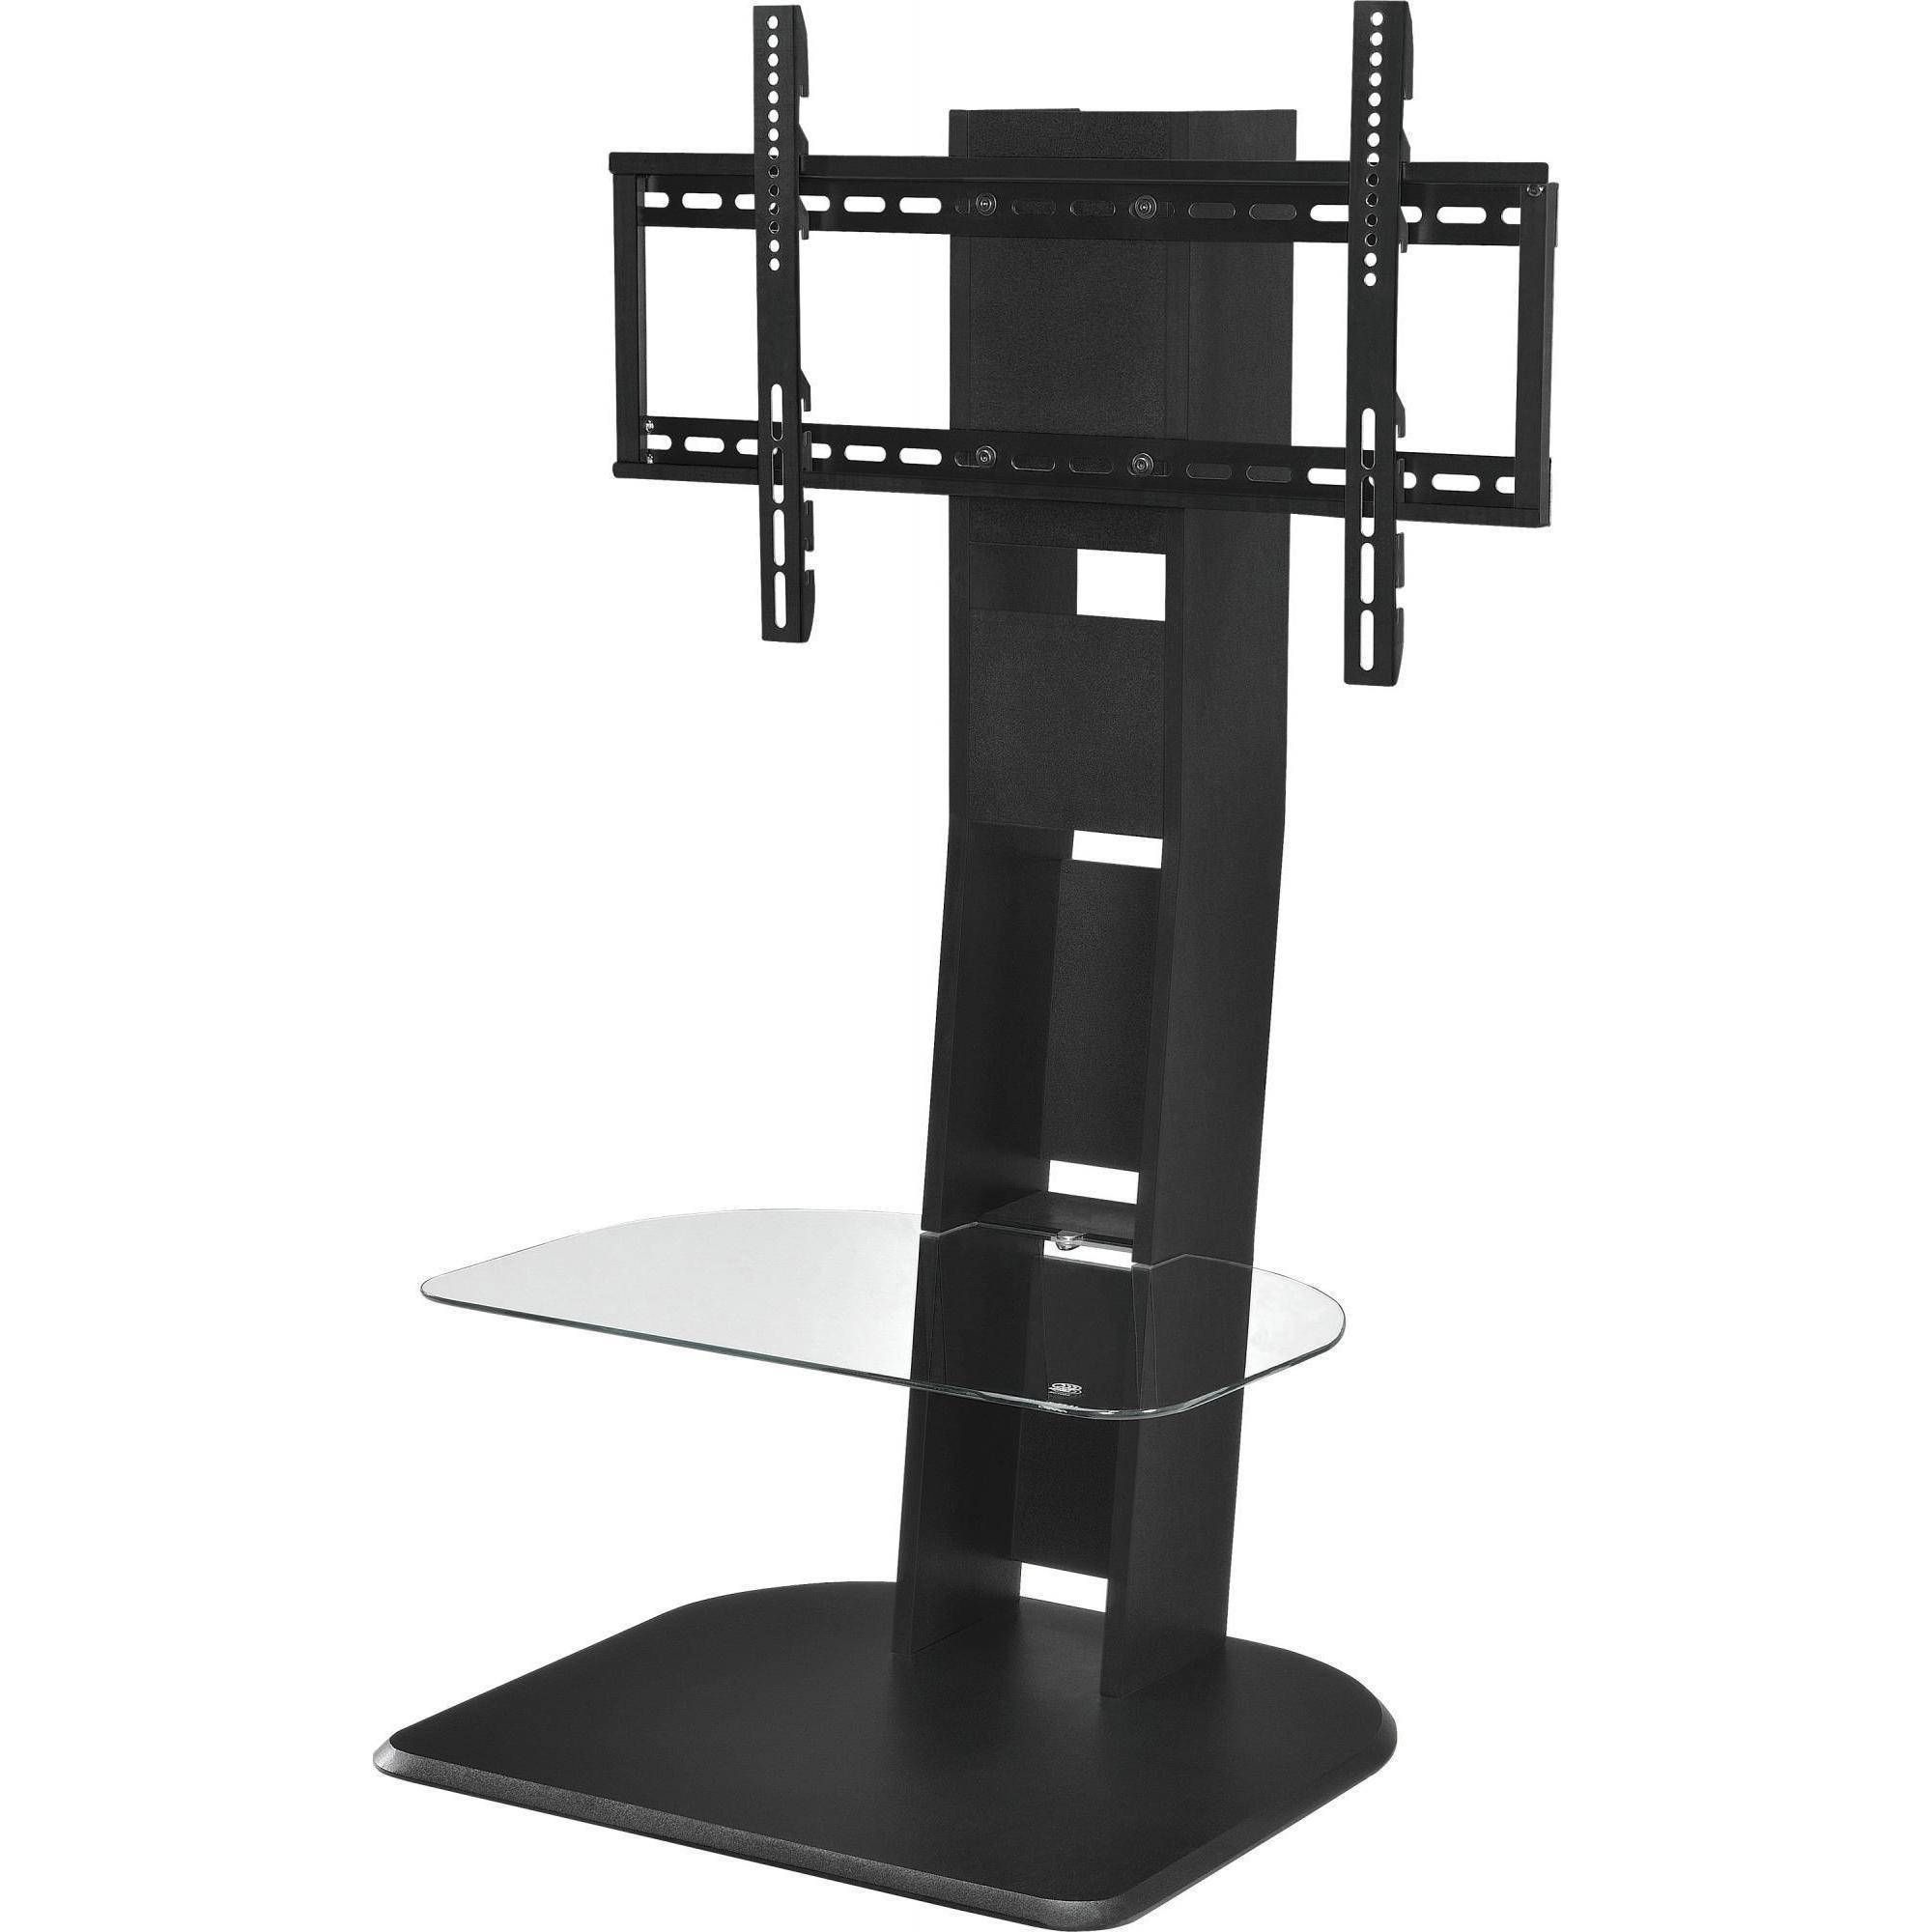 New Top Quality Tv Stand With Mount For Tvs Up To 50 Pertaining To Caleah Tv Stands For Tvs Up To 50" (Gallery 20 of 20)